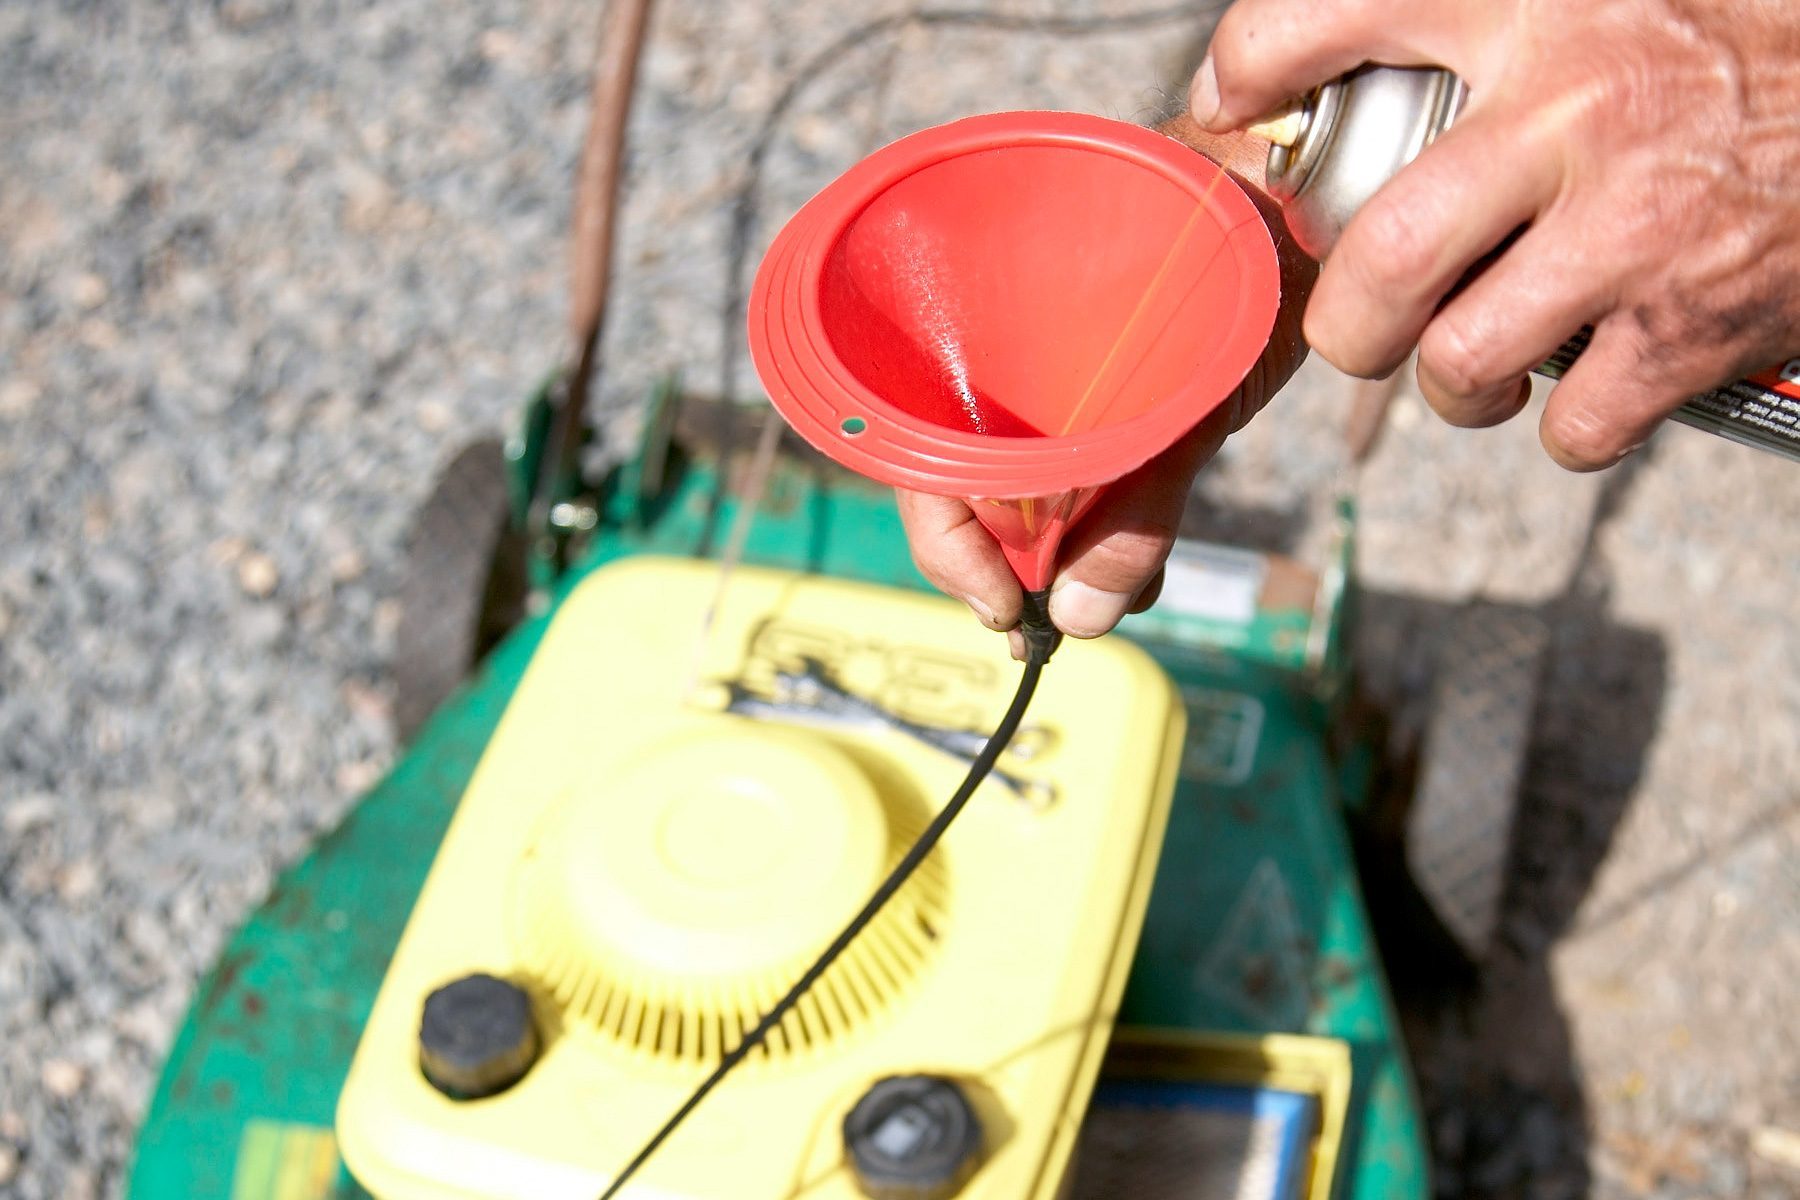 A person is holding a red funnel and a can, likely adding oil or fuel to the yellow engine of a green lawnmower. The lawnmower is on a gravel surface.